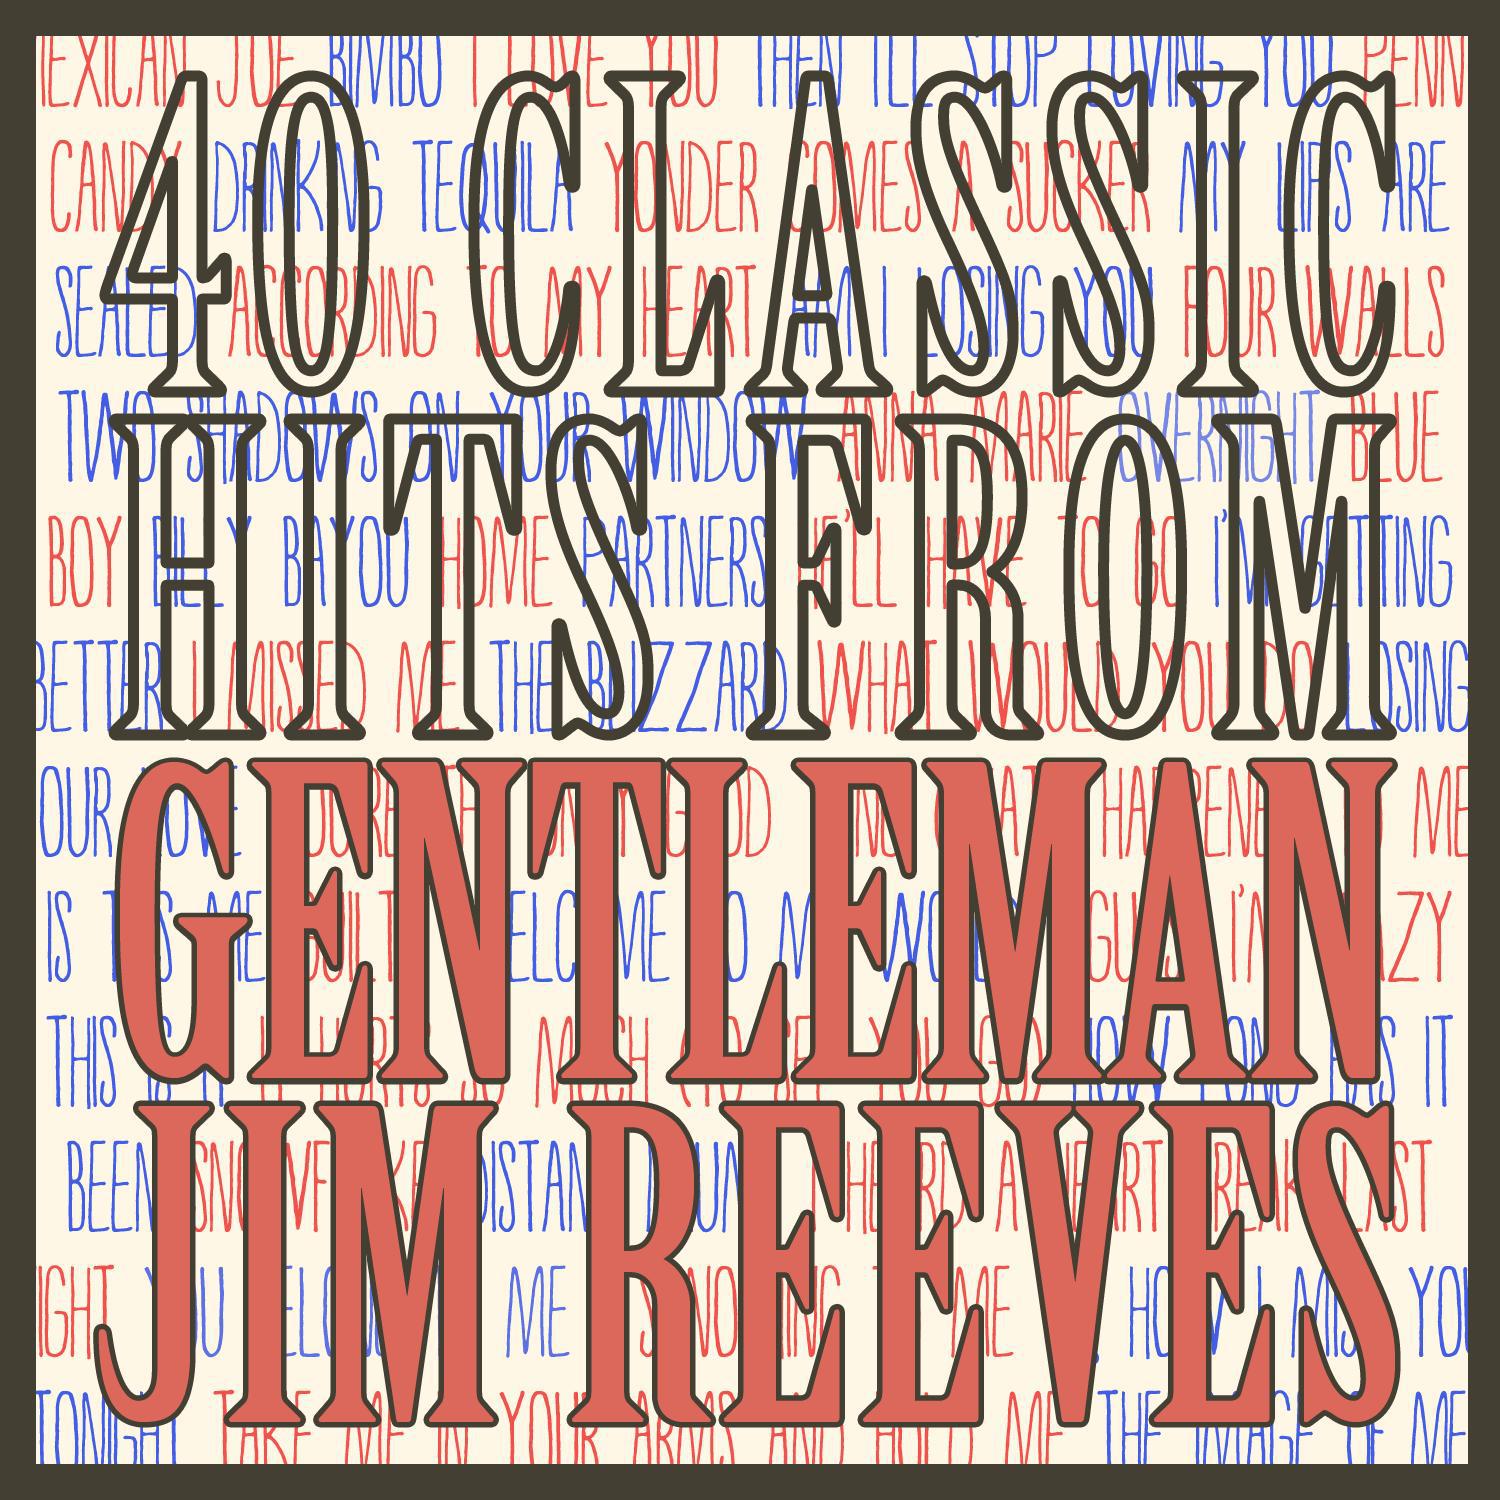 40 Classic Hits from Gentleman Jim Reeves